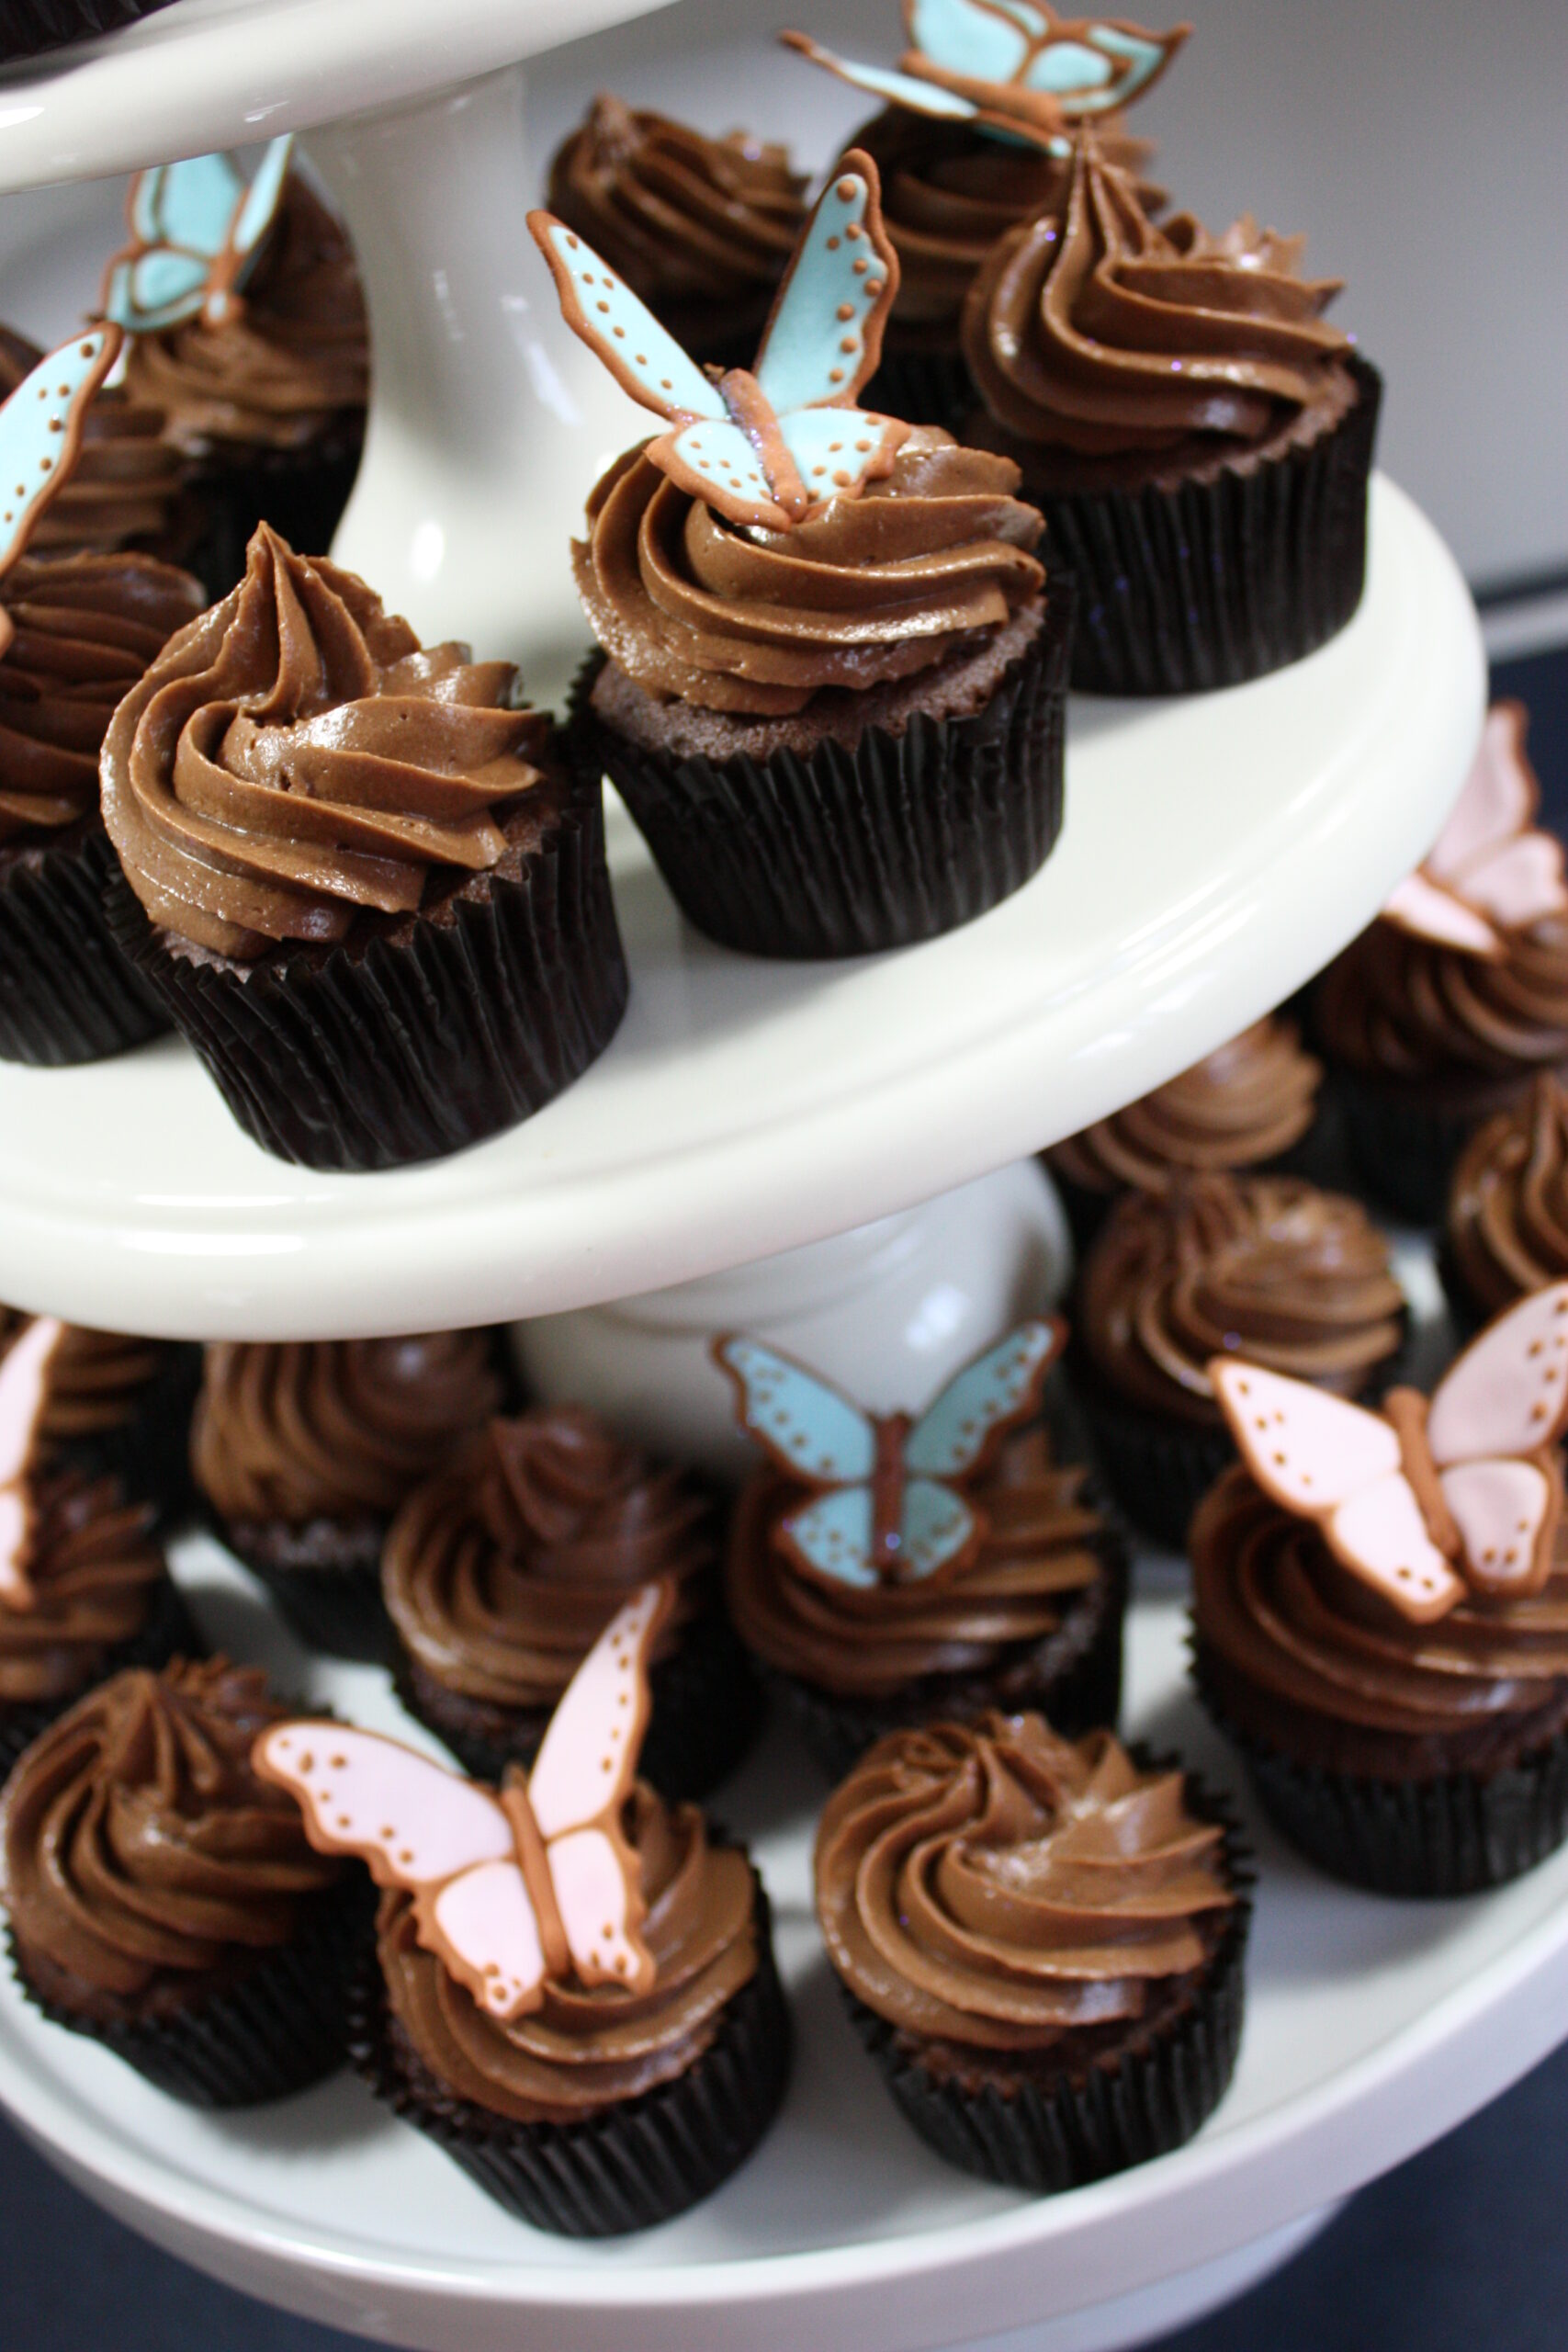 Chocolate Cupcakes with Royal Icing Butterflies | Sweetopia